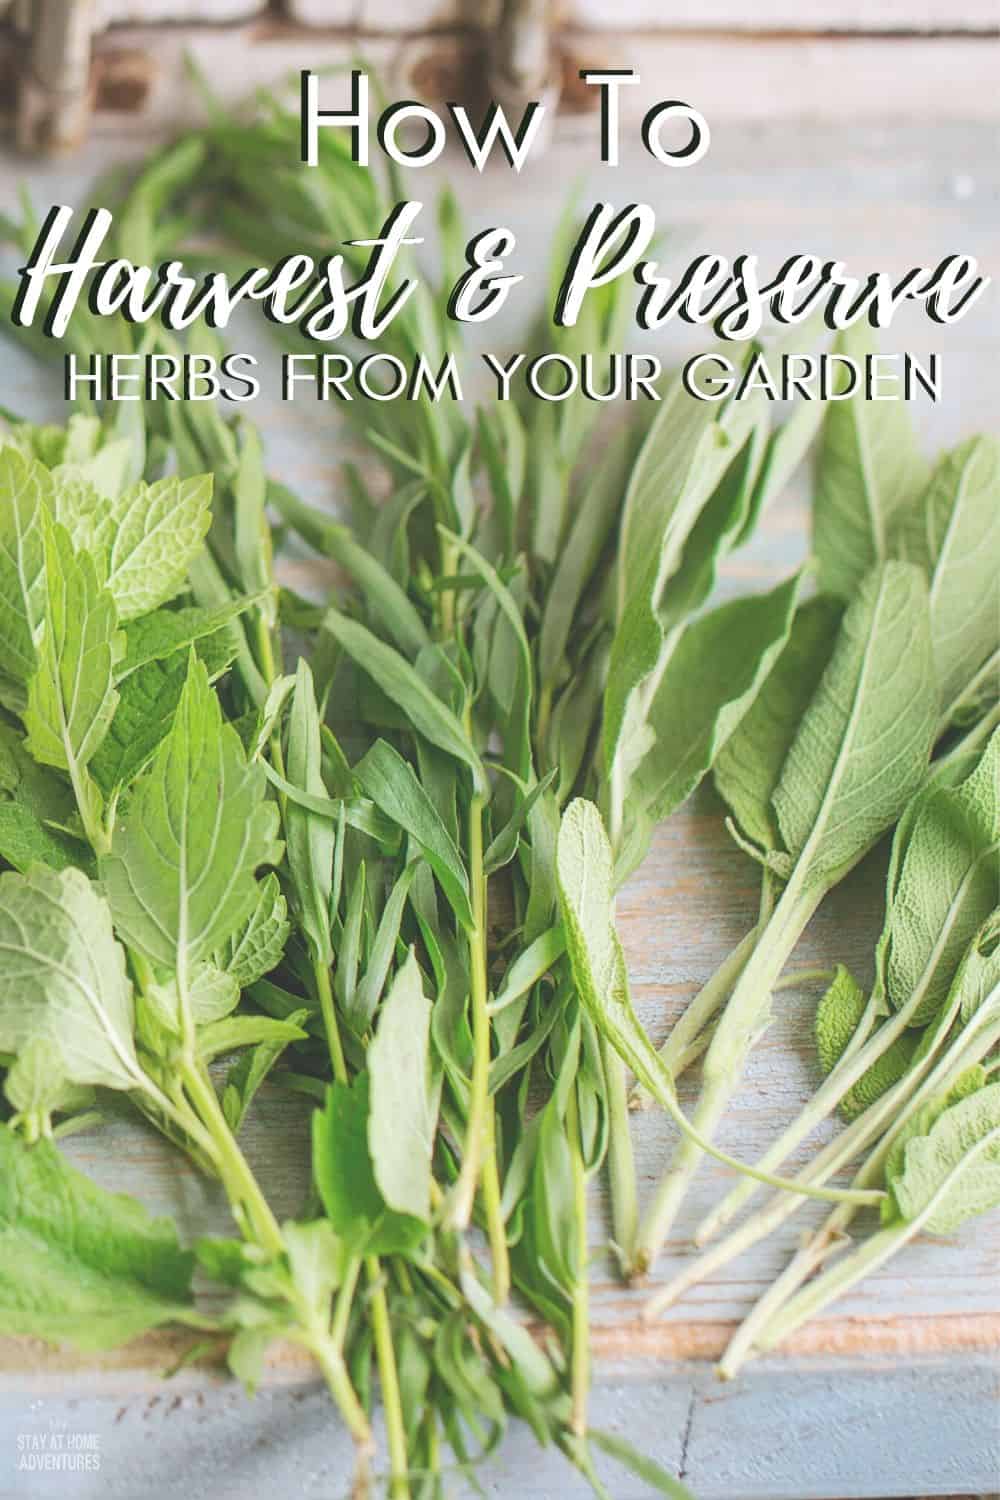 This gardening season, learn how to harvest and preserve herbs with these tips any beginner gardeners can follow. Learn what they are today. #gardeningtips #herbgarden #harvestherbs via @mystayathome